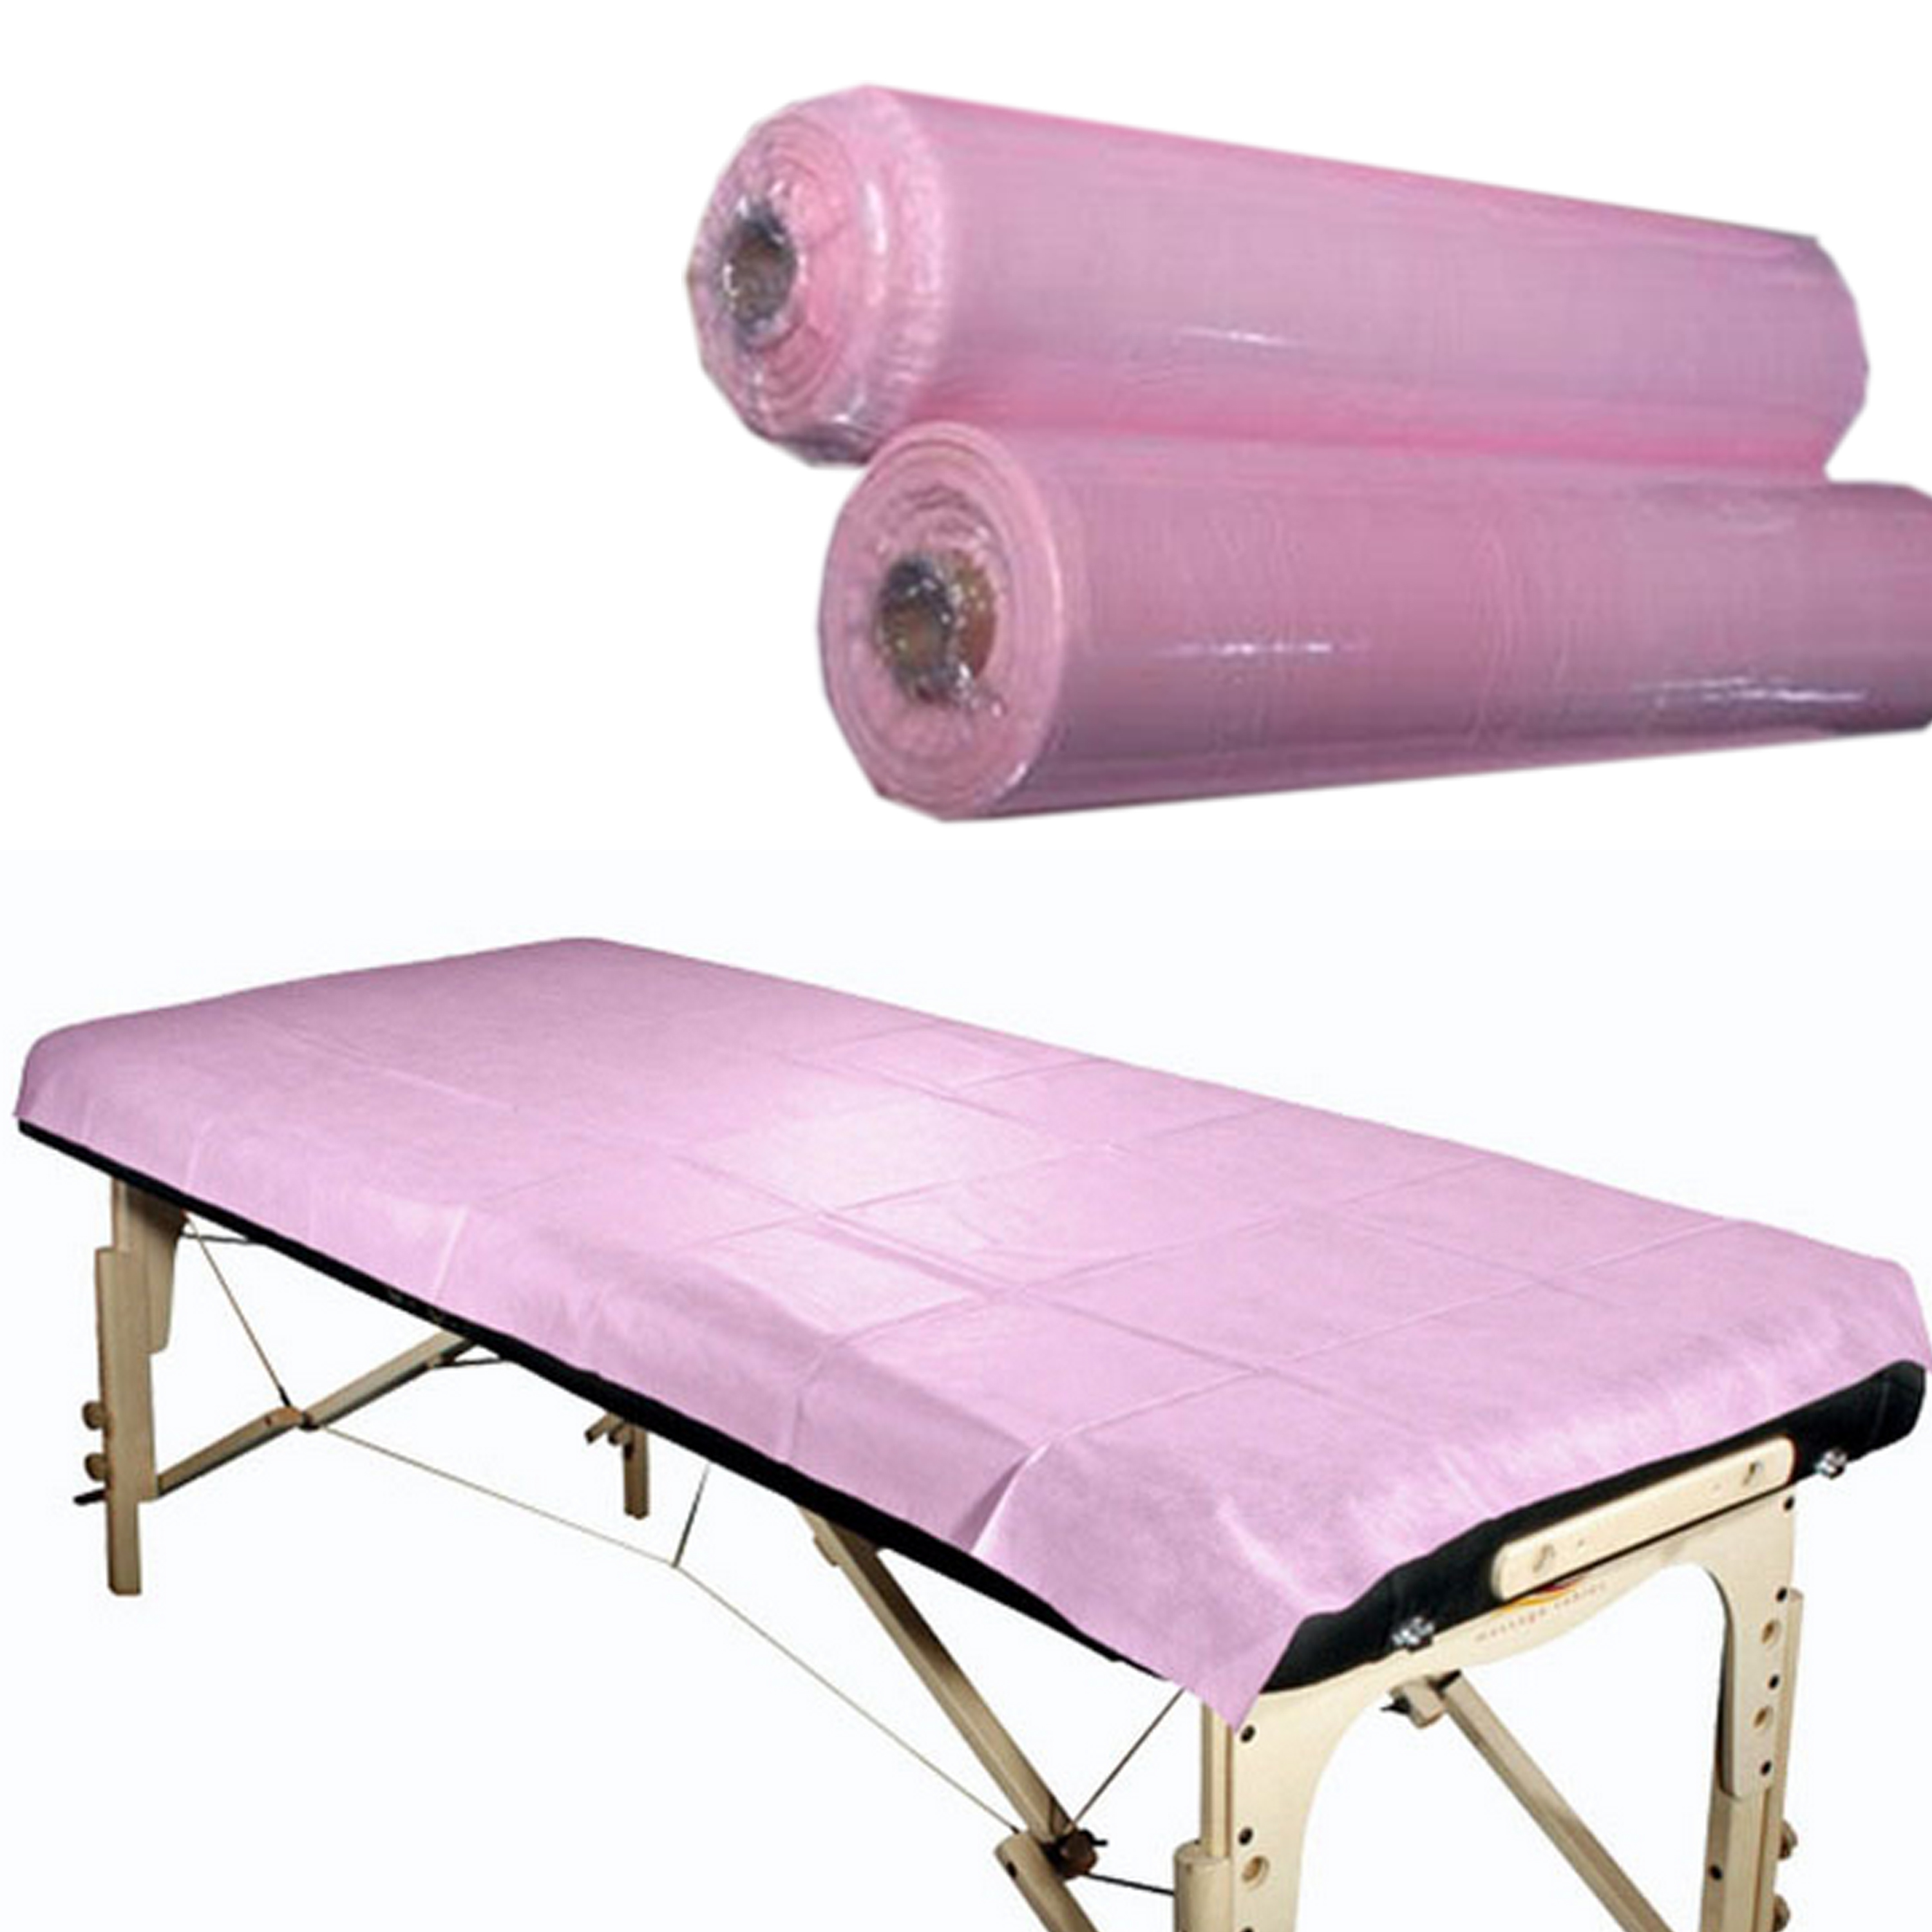 PINK roll